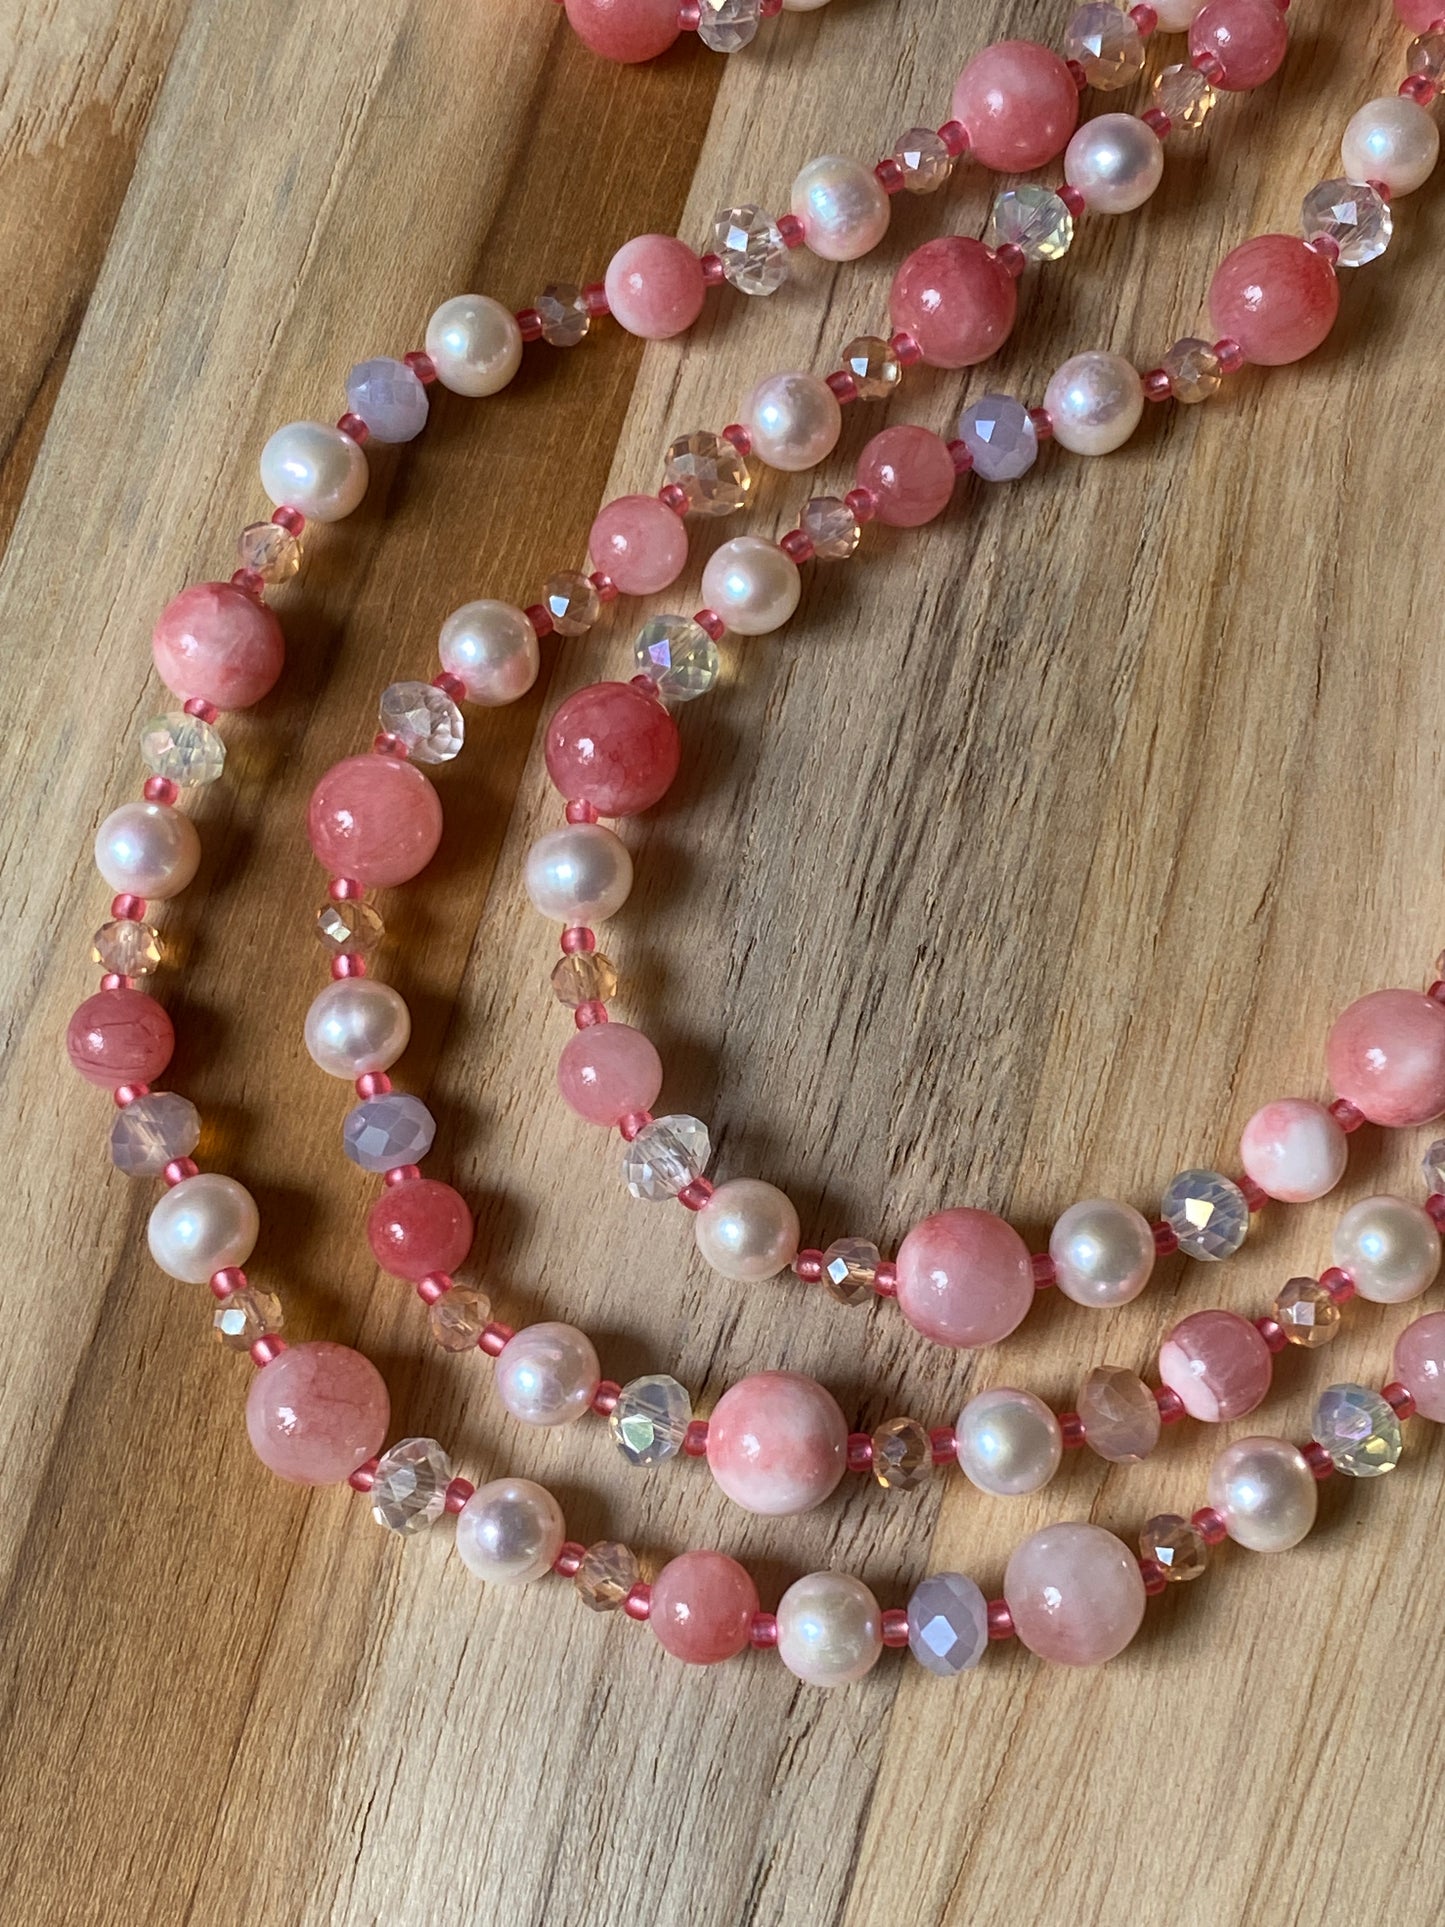 60" Extra Long Wraparound Style Pink/Peach Chalcedony Necklace with Pearl and Crystal Beads - My Urban Gems